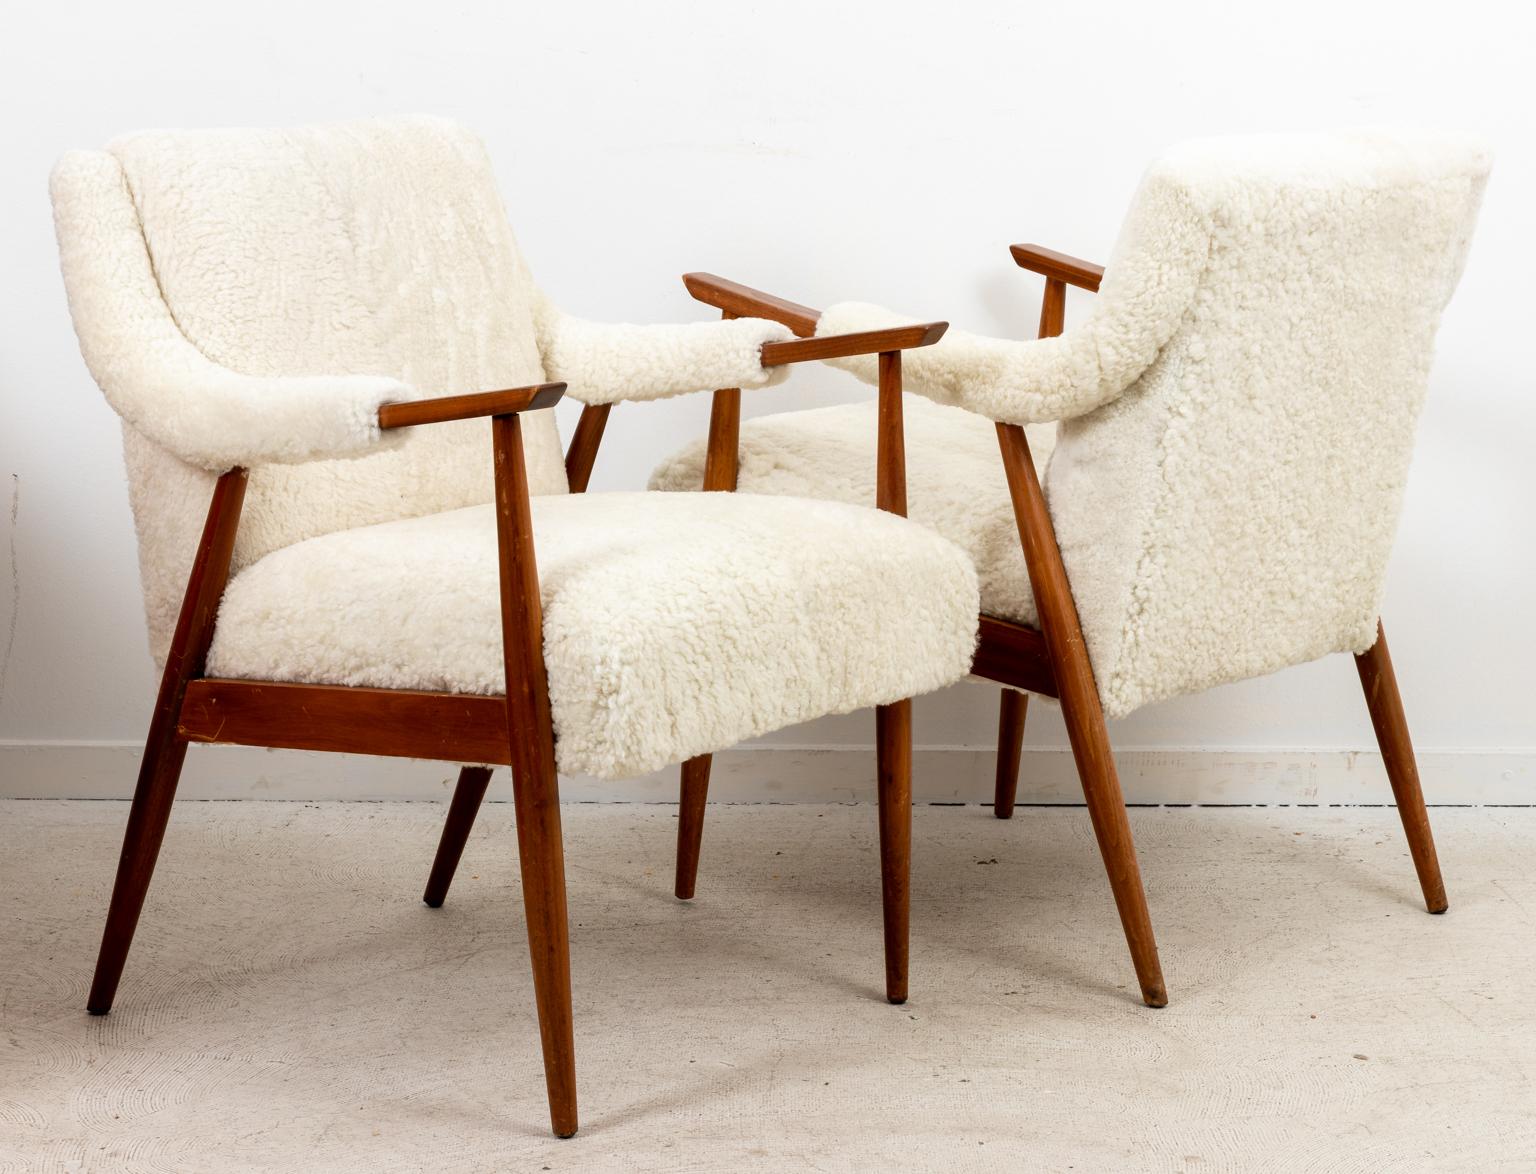 Circa 1960s Shearling Danish Modern style armchairs, freshly upholstered in lamb shearling. Made in Denmark. Please note of wear consistent with age including scratches and minor finish loss to the wood frame.